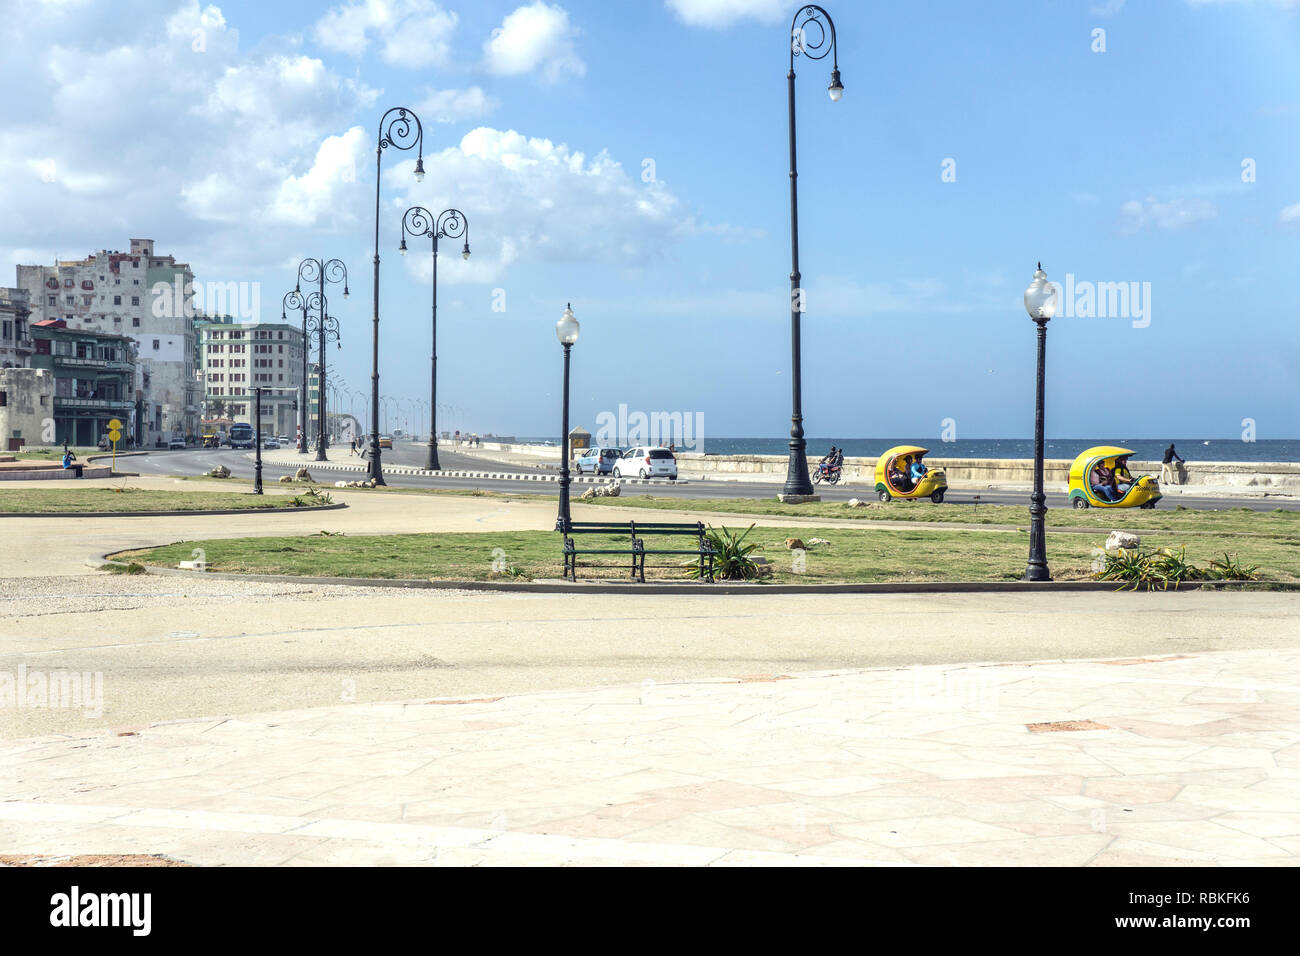 view graceful access & egress to pre-revolutionary Havana Malecon built by American engineers according to 30's Havana master plan by JCN Forestier Stock Photo